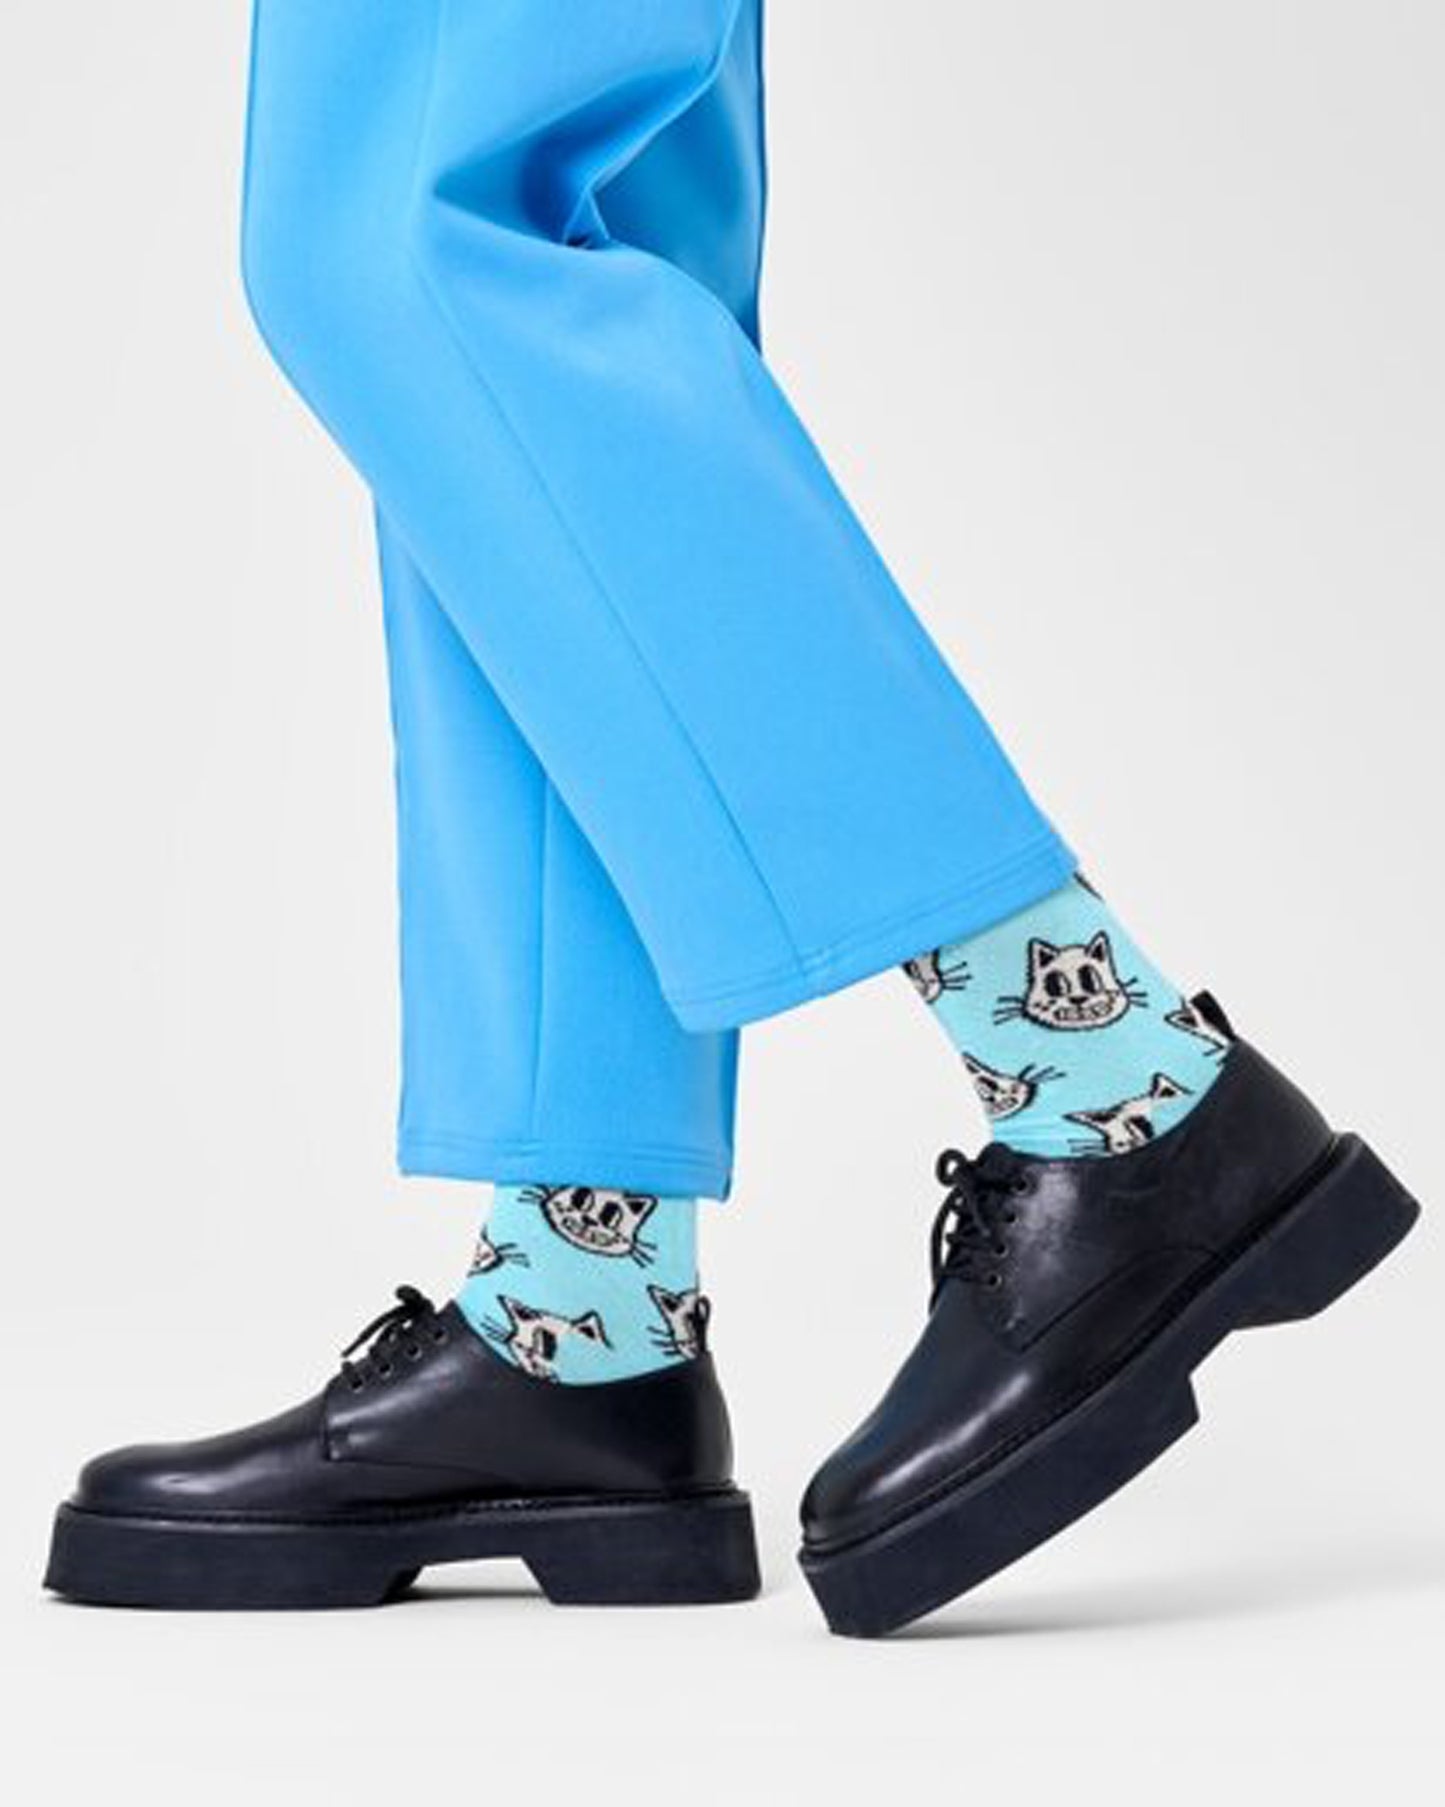 Happy Socks P000721 Cat Sock - Light blue cotton crew length ankle socks with a cartoon cat face pattern in white and black, worn with black brogues and blue cropped pants.